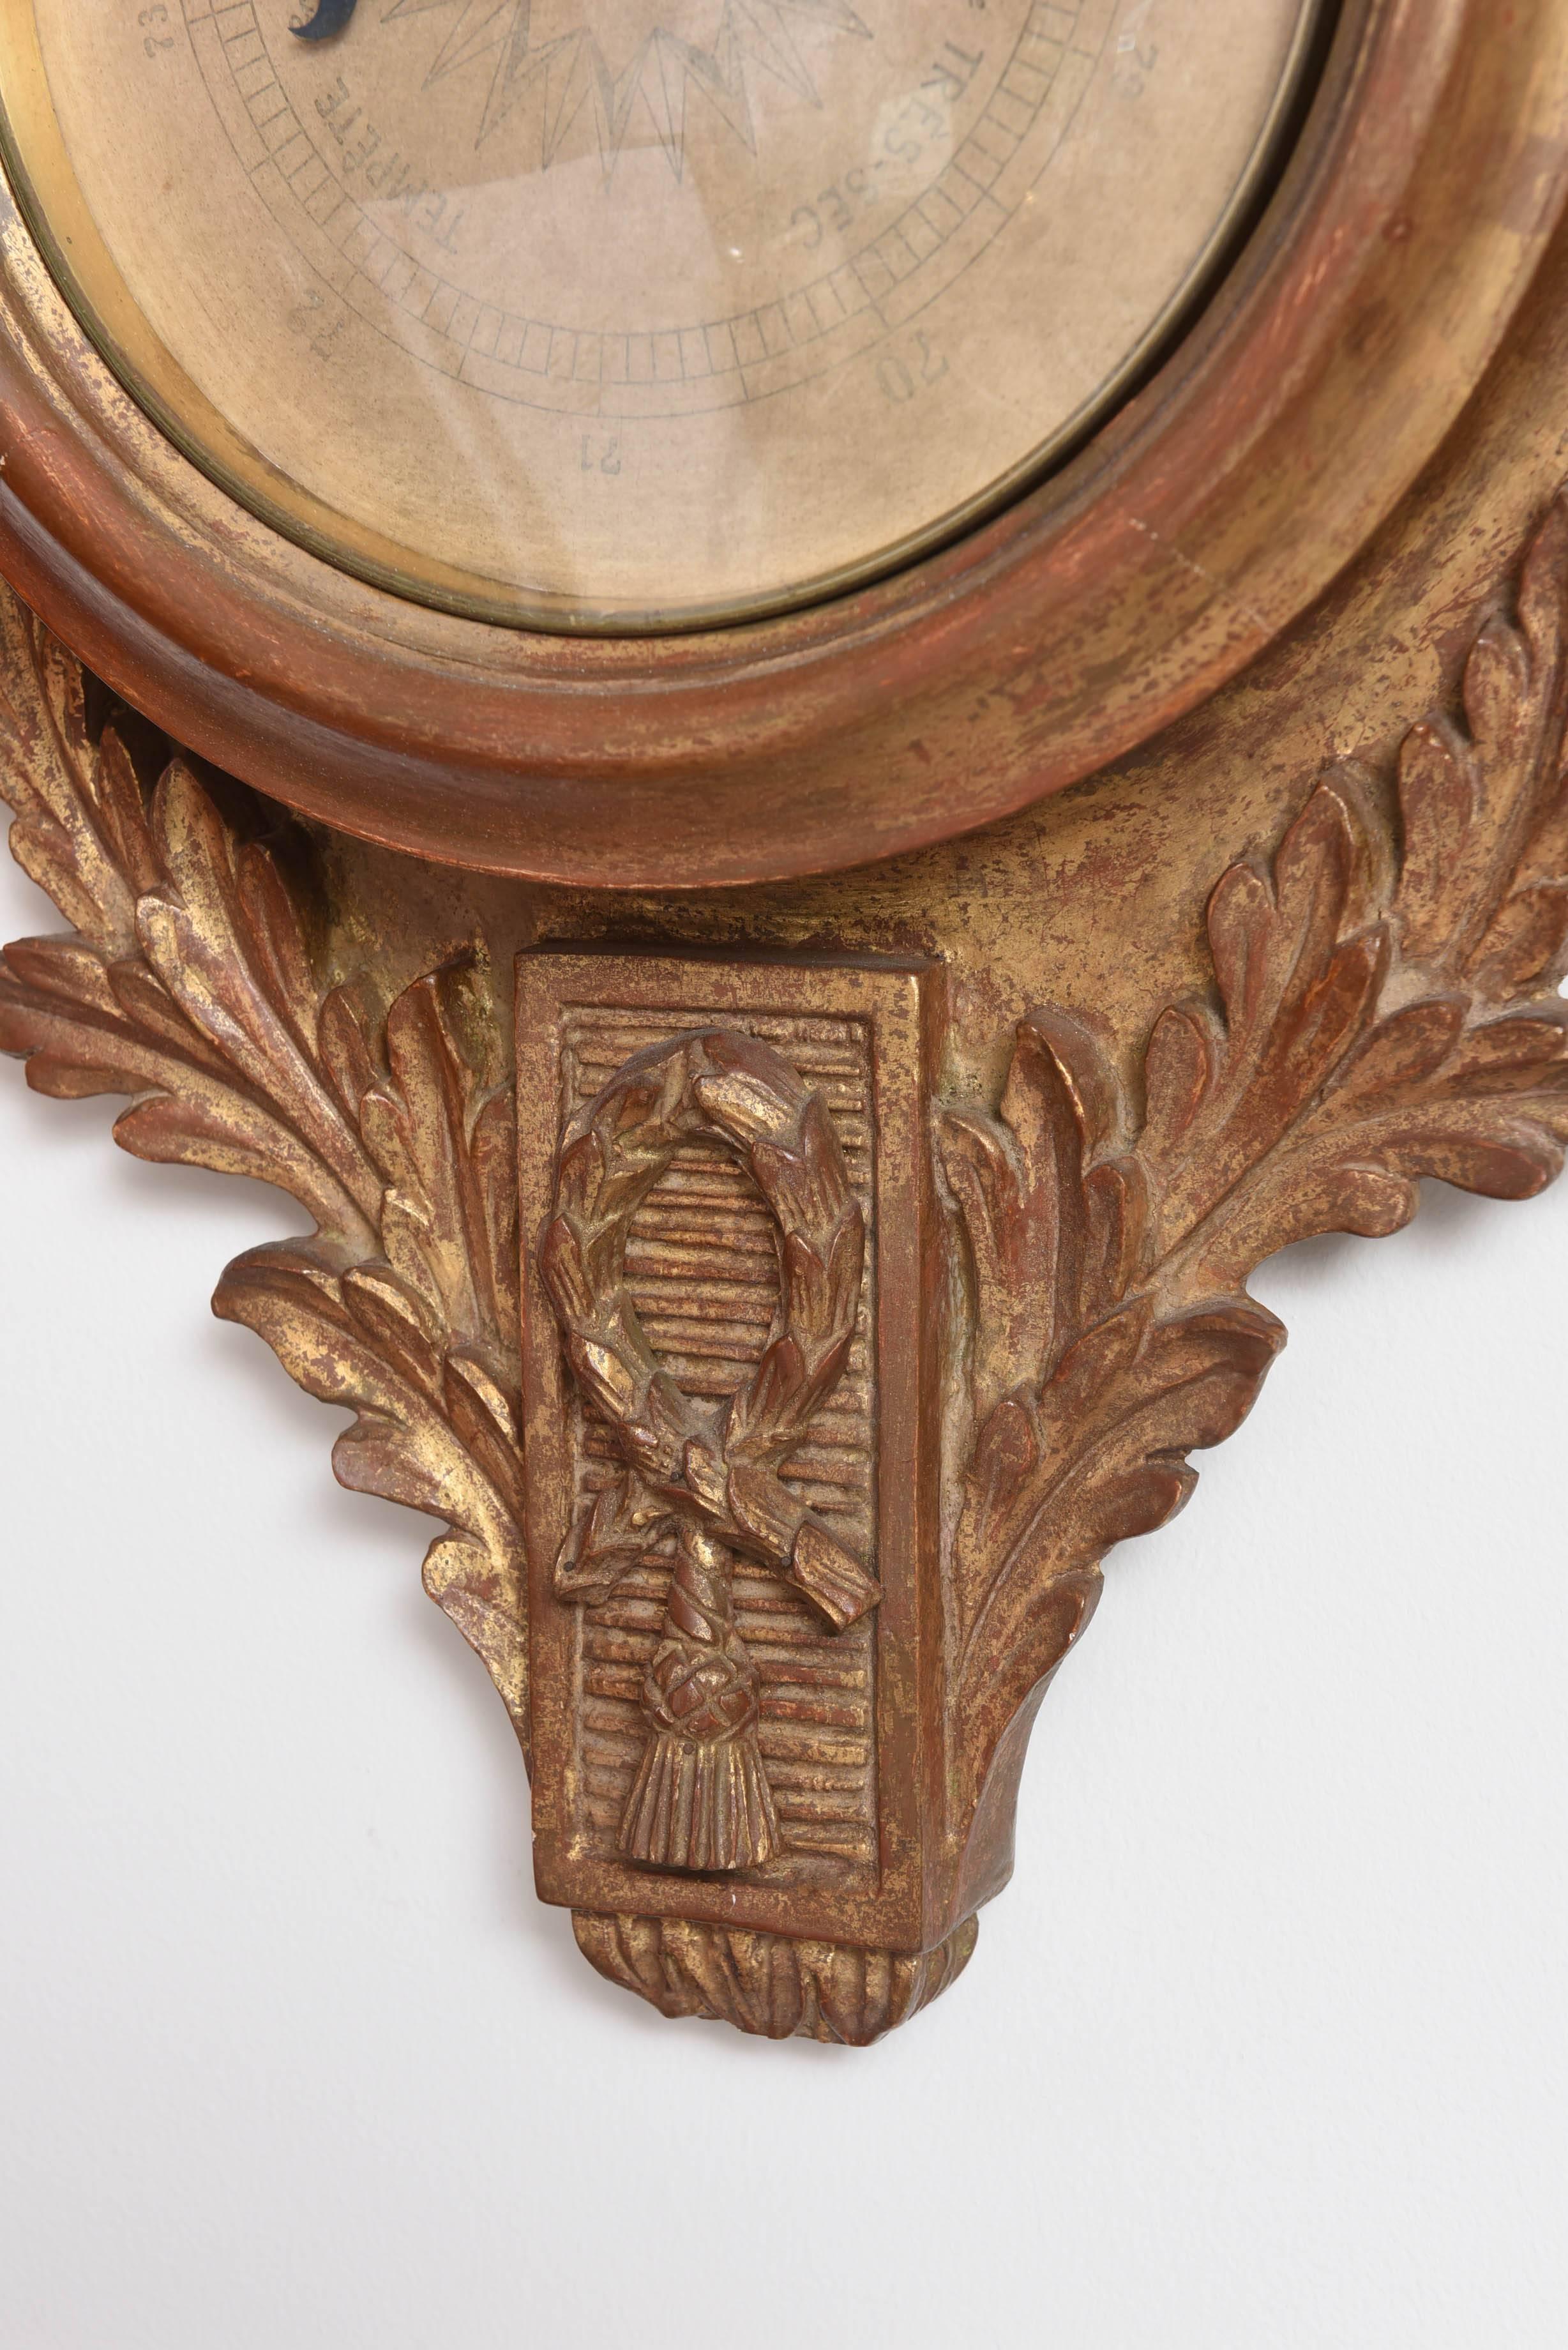 20th Century Rope and Swag Gilded Carved Wood Palladio Barometer